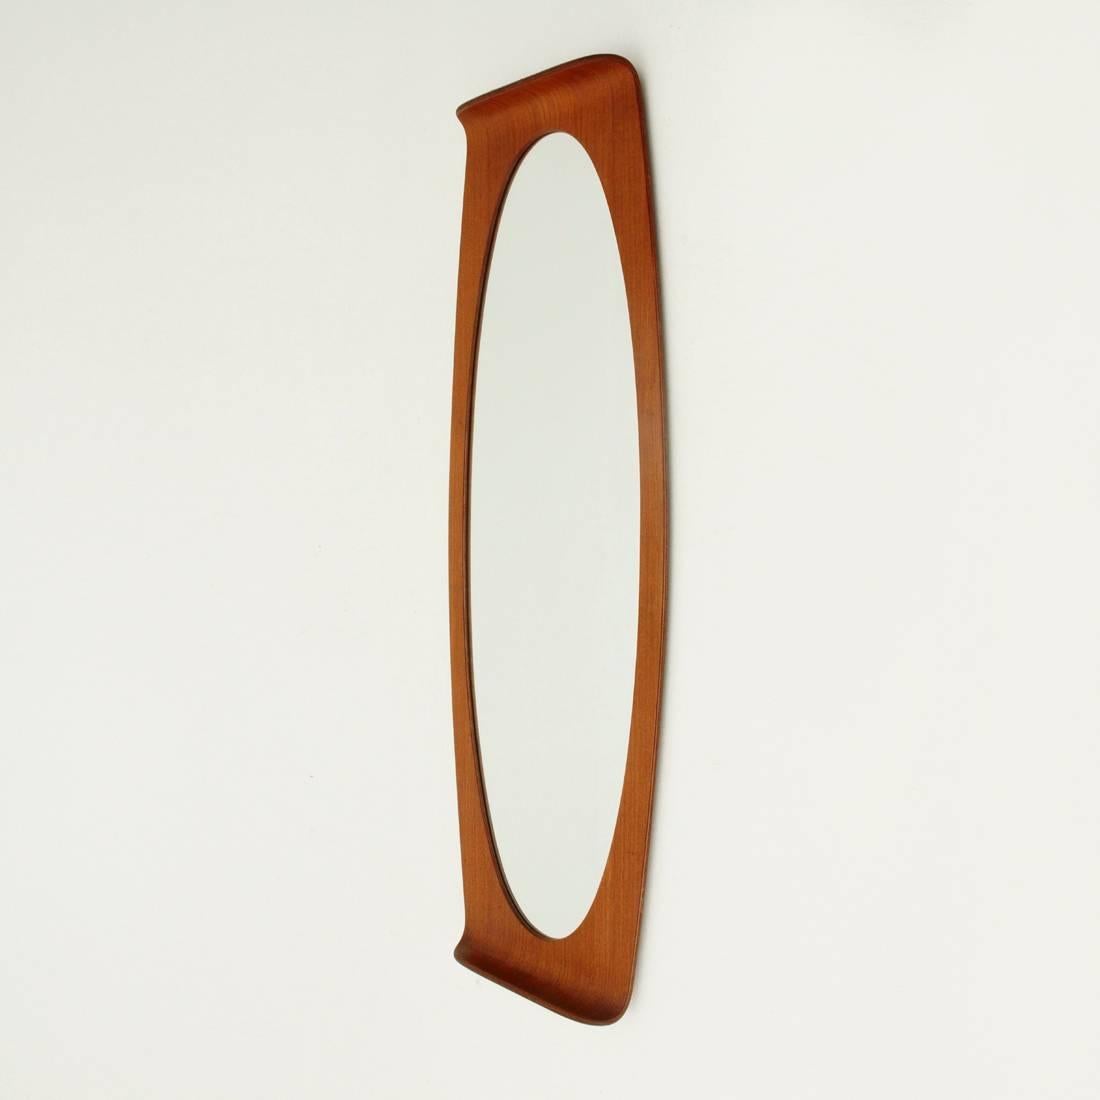 Mirror produced by Home design by Franco Campo and Carlo Graffi.
Curved wood structure.
Good conditions.

Dimensions: Width 46 cm, depth 7 cm, height 121 cm.